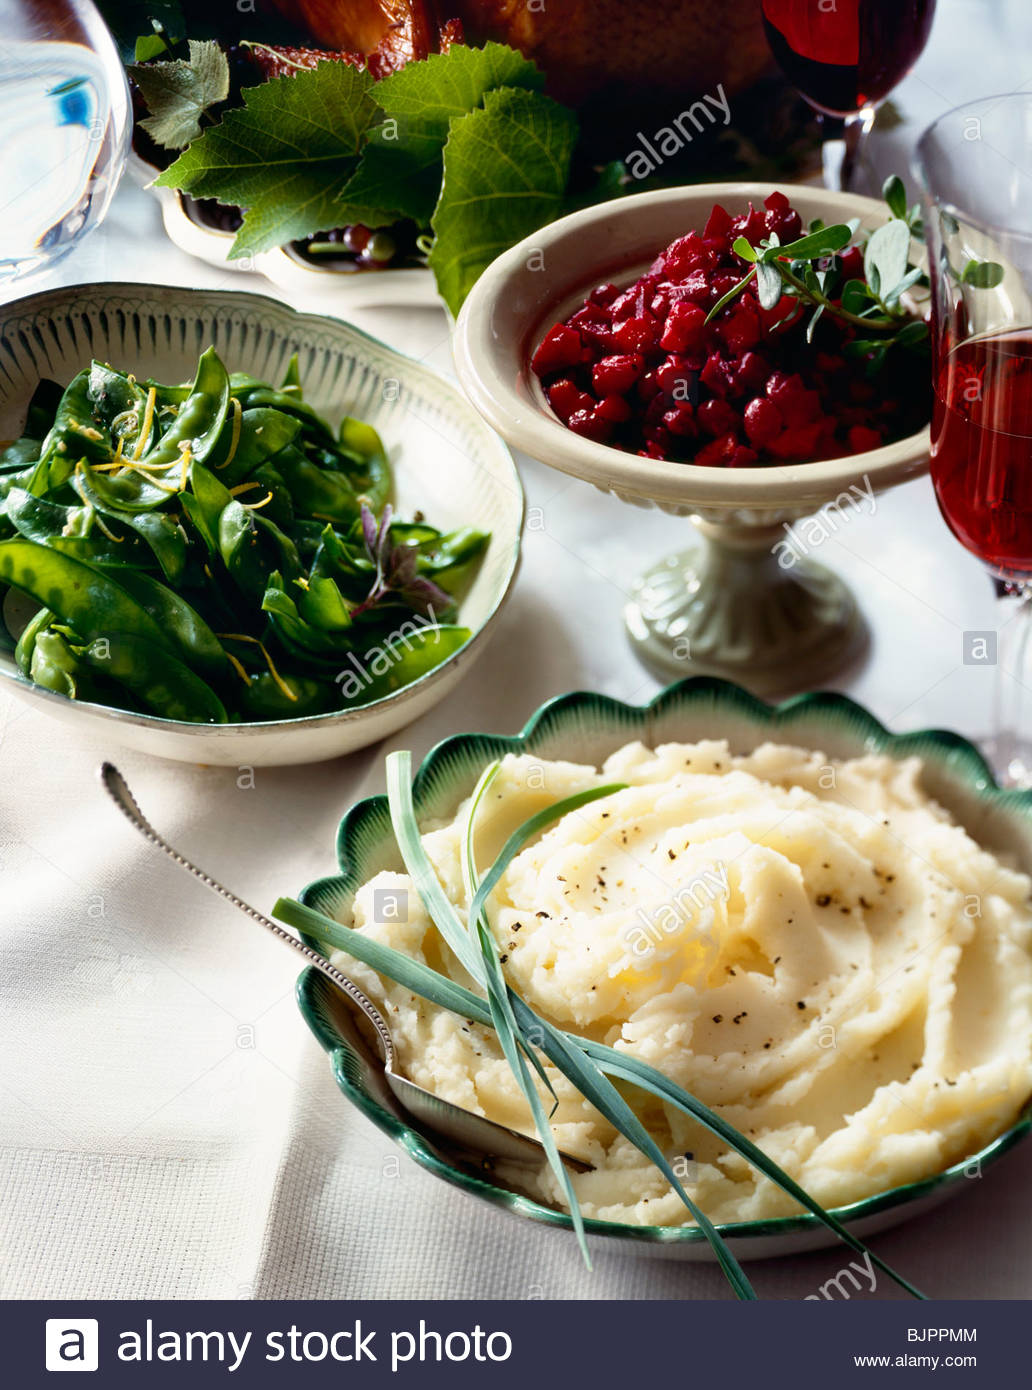 side-dishes-on-buffet-table-mashed-potatoes-snow-peas-cranberry-sauce-BJPPMM.jpg